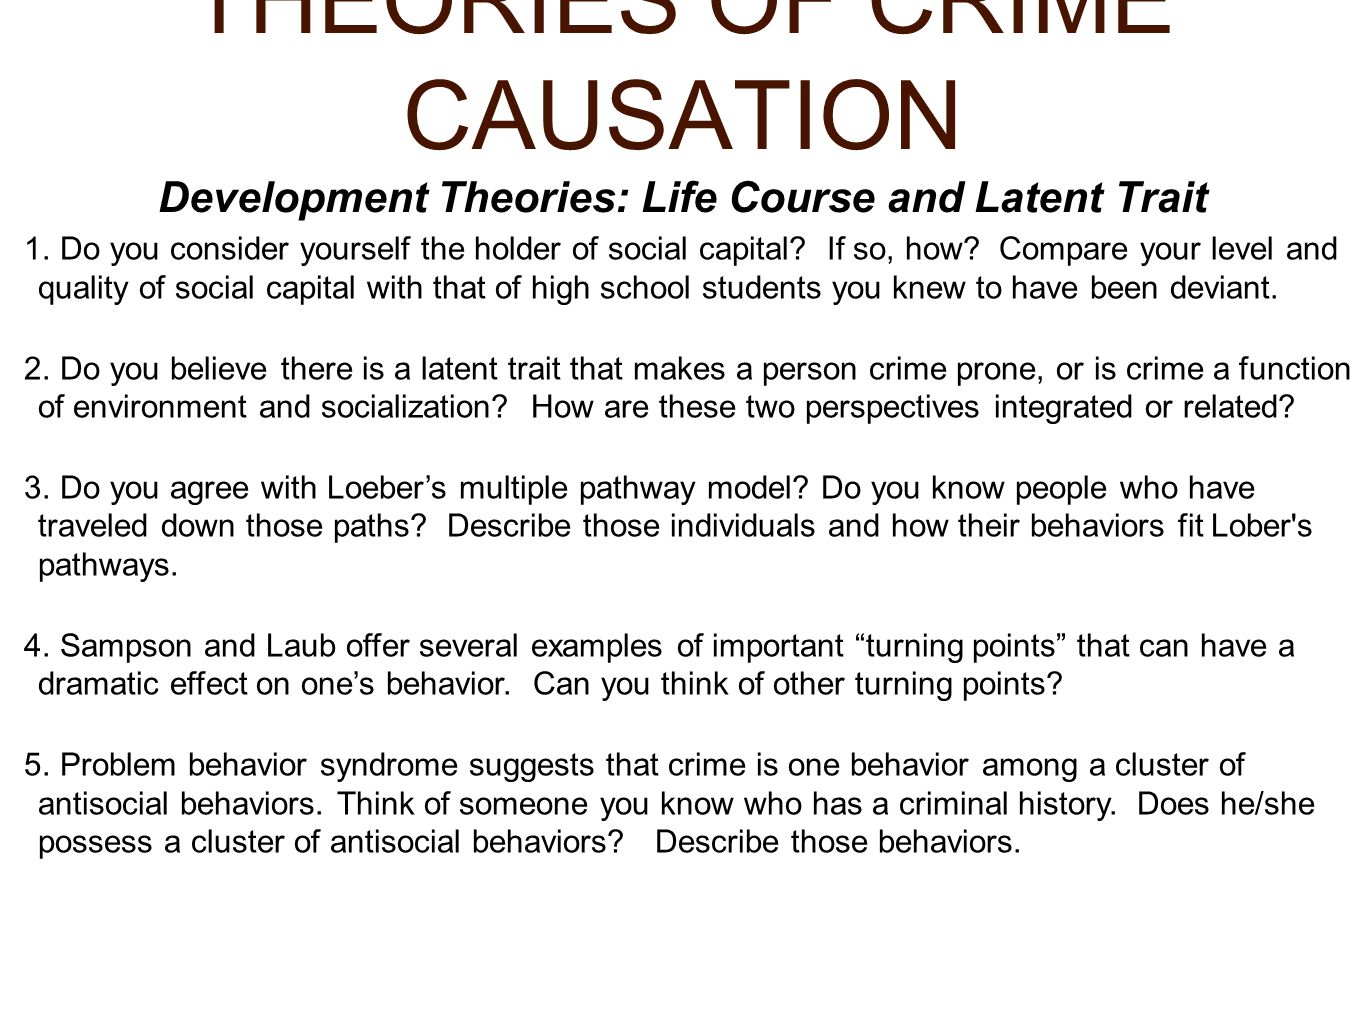 What Are the Theories of Crime Causation?